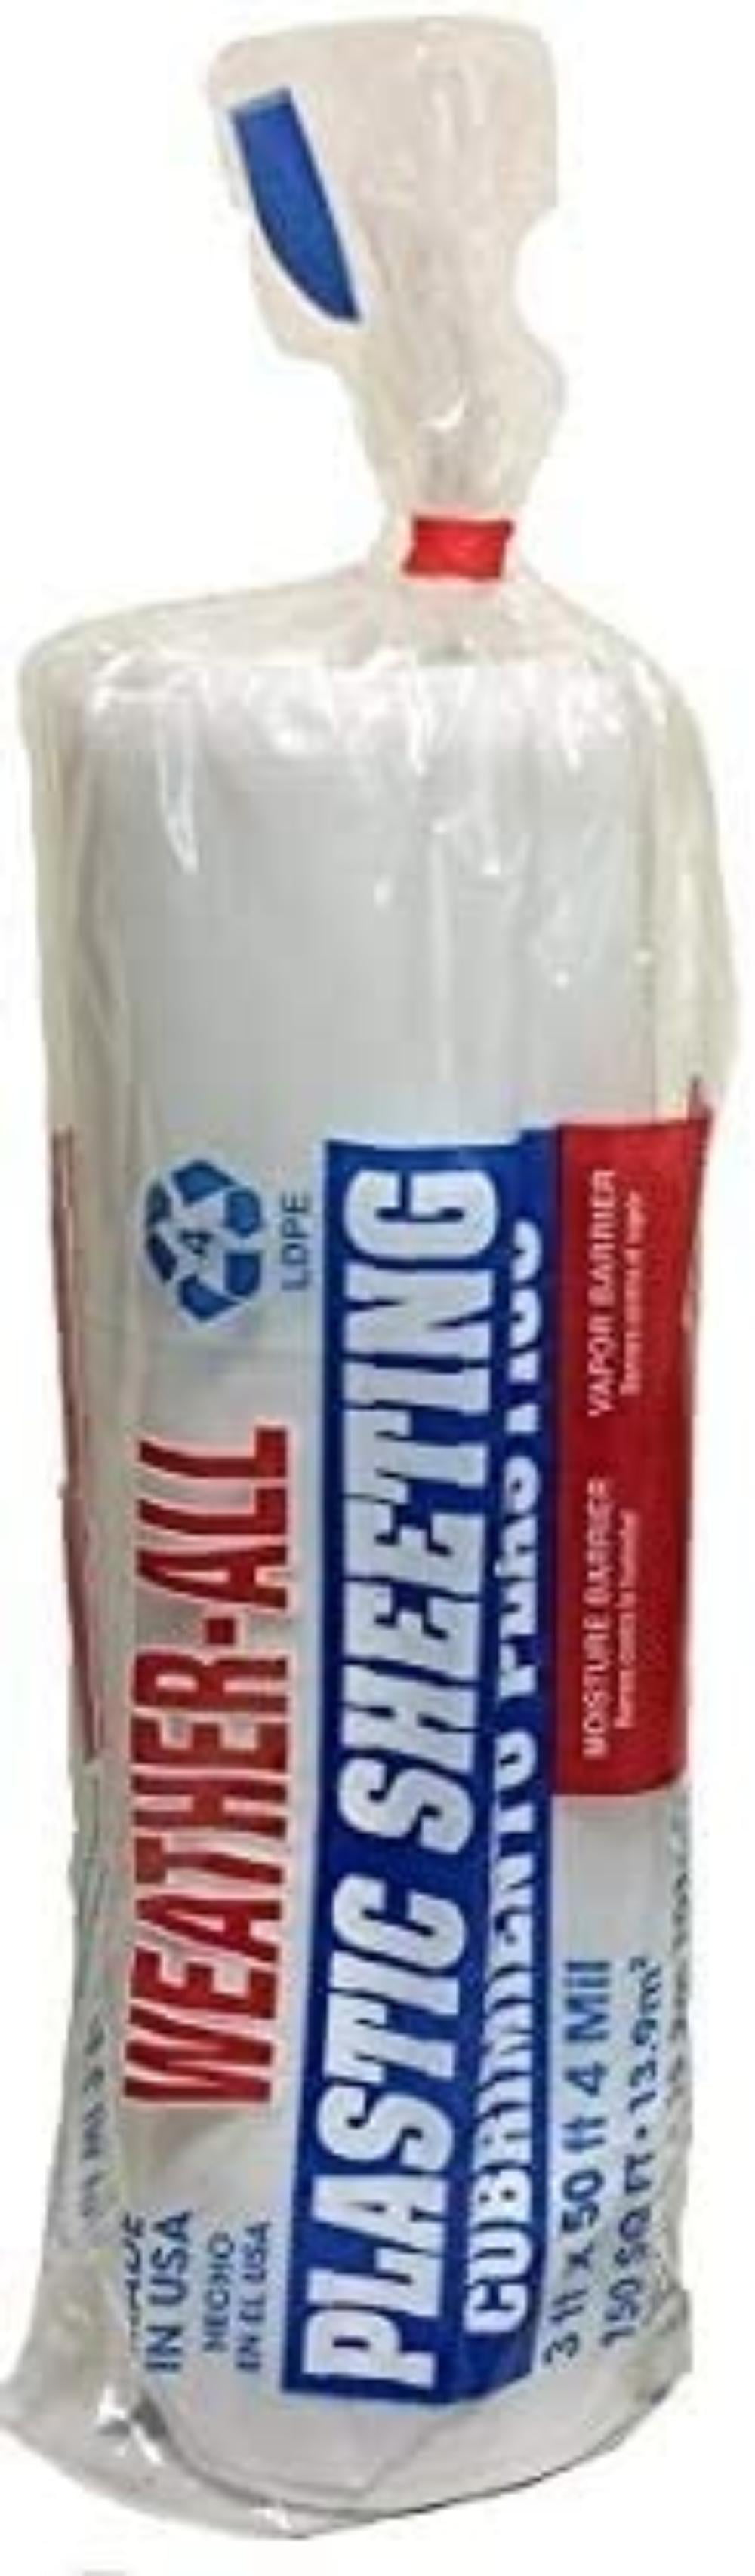 Drop Cloth 3 Wide x 50 Length x 4.0 mil Thickness Clear TRM Manufacturing 40350C Weatherall Visqueen Plastic Sheeting 